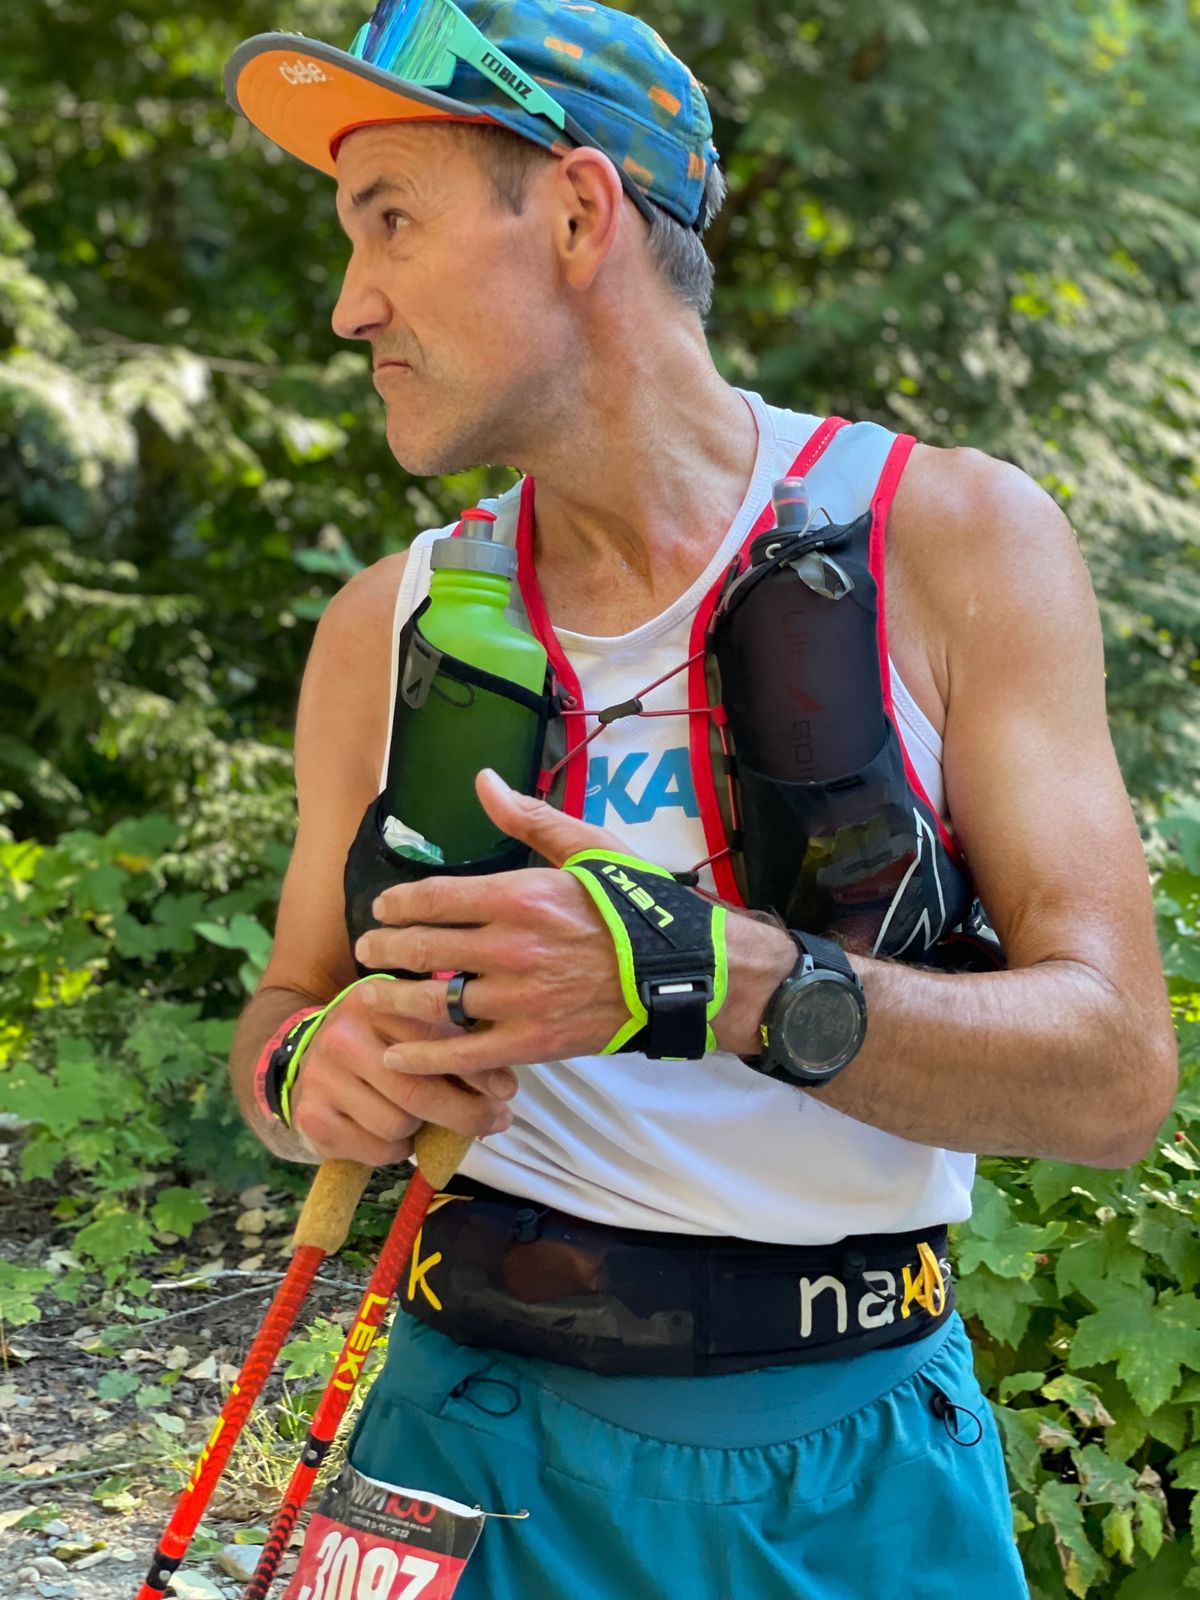 Dirtbag Runners Bow valley workout Sept 15, 2022 - 'THE MICHIGAN'